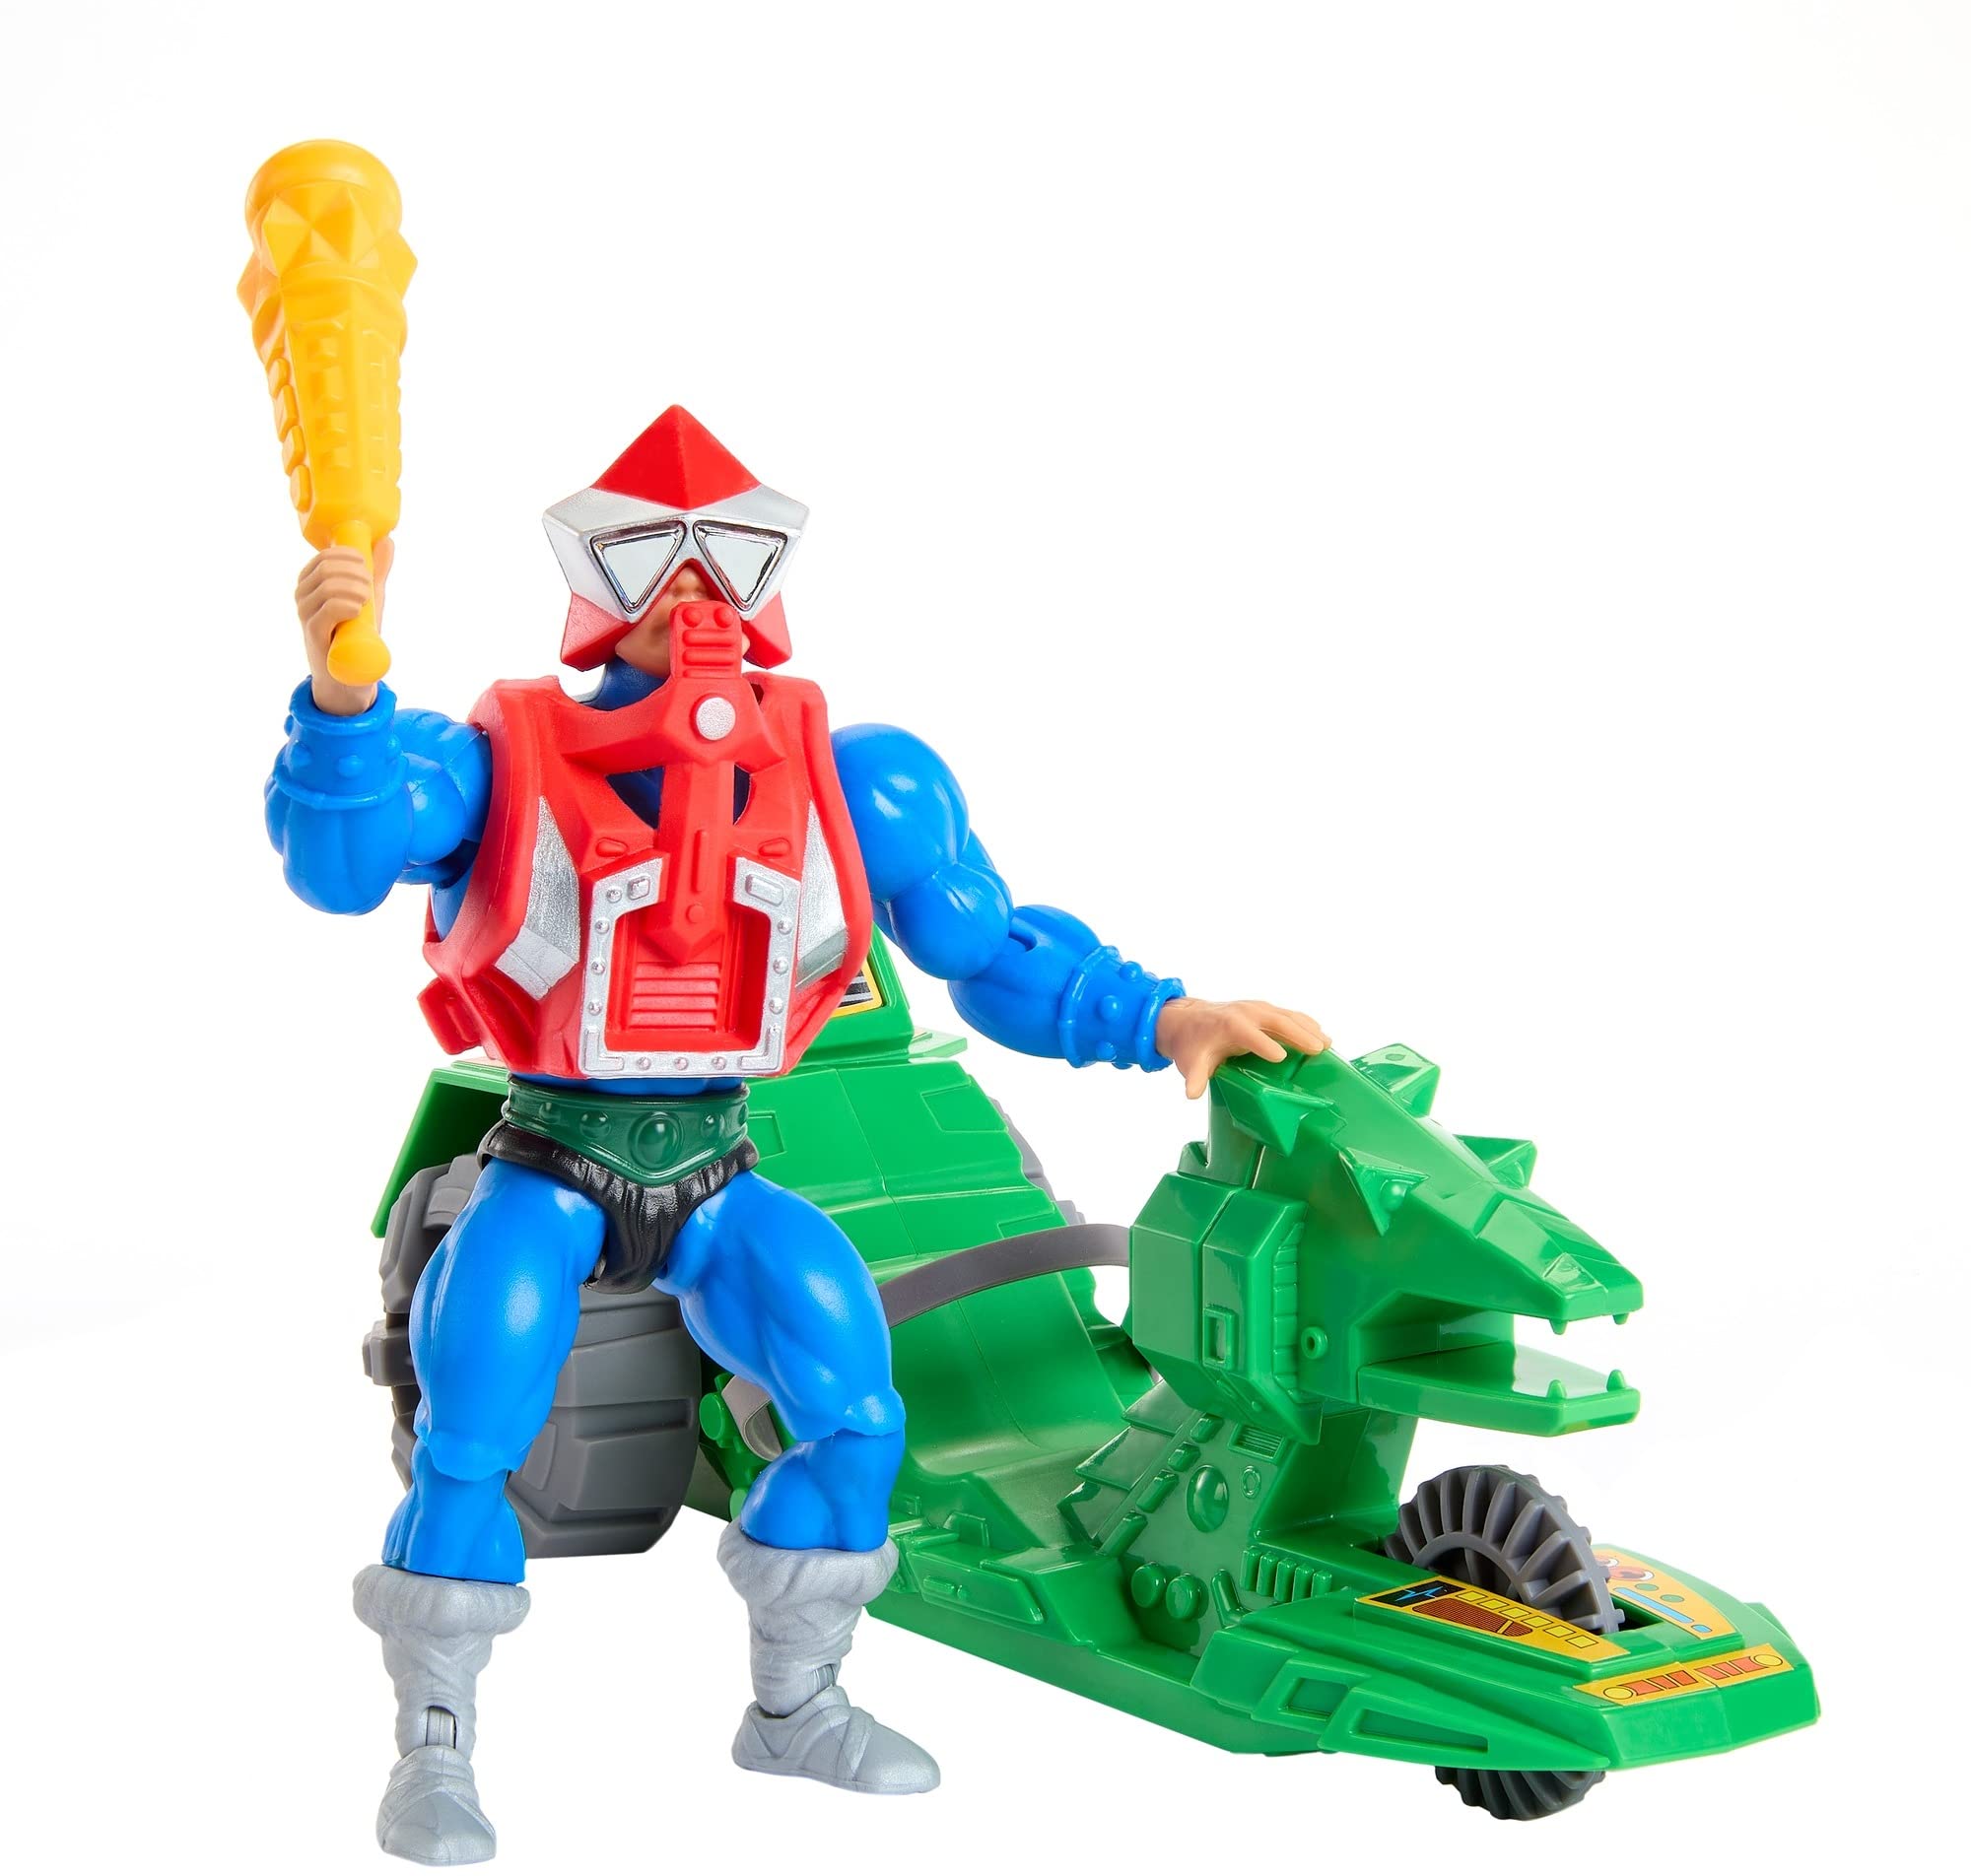 Masters of the Universe Origins Action Figure & Vehicle, Ground Ripper & Mekaneck, 80S Inspired MOTU Toy with Accessories